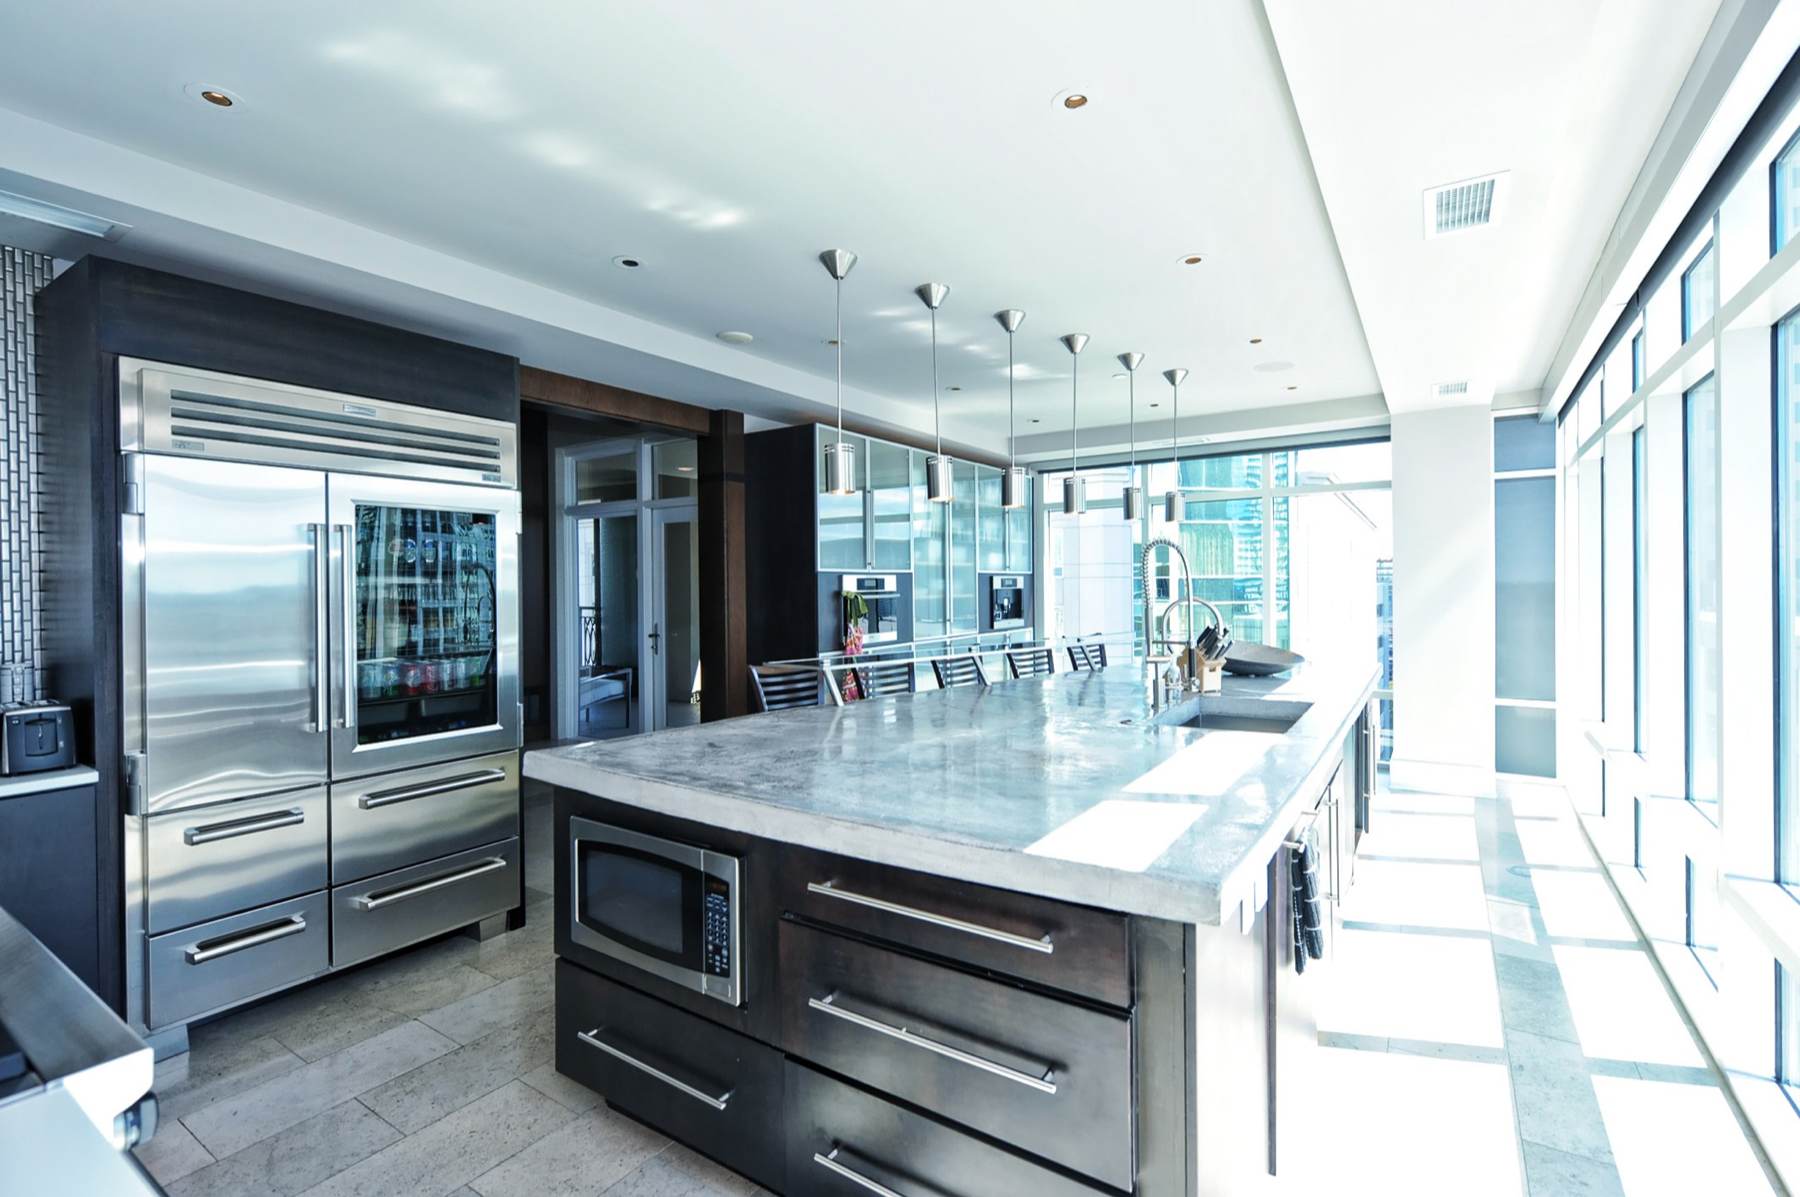 penthouse kitchen and dining room